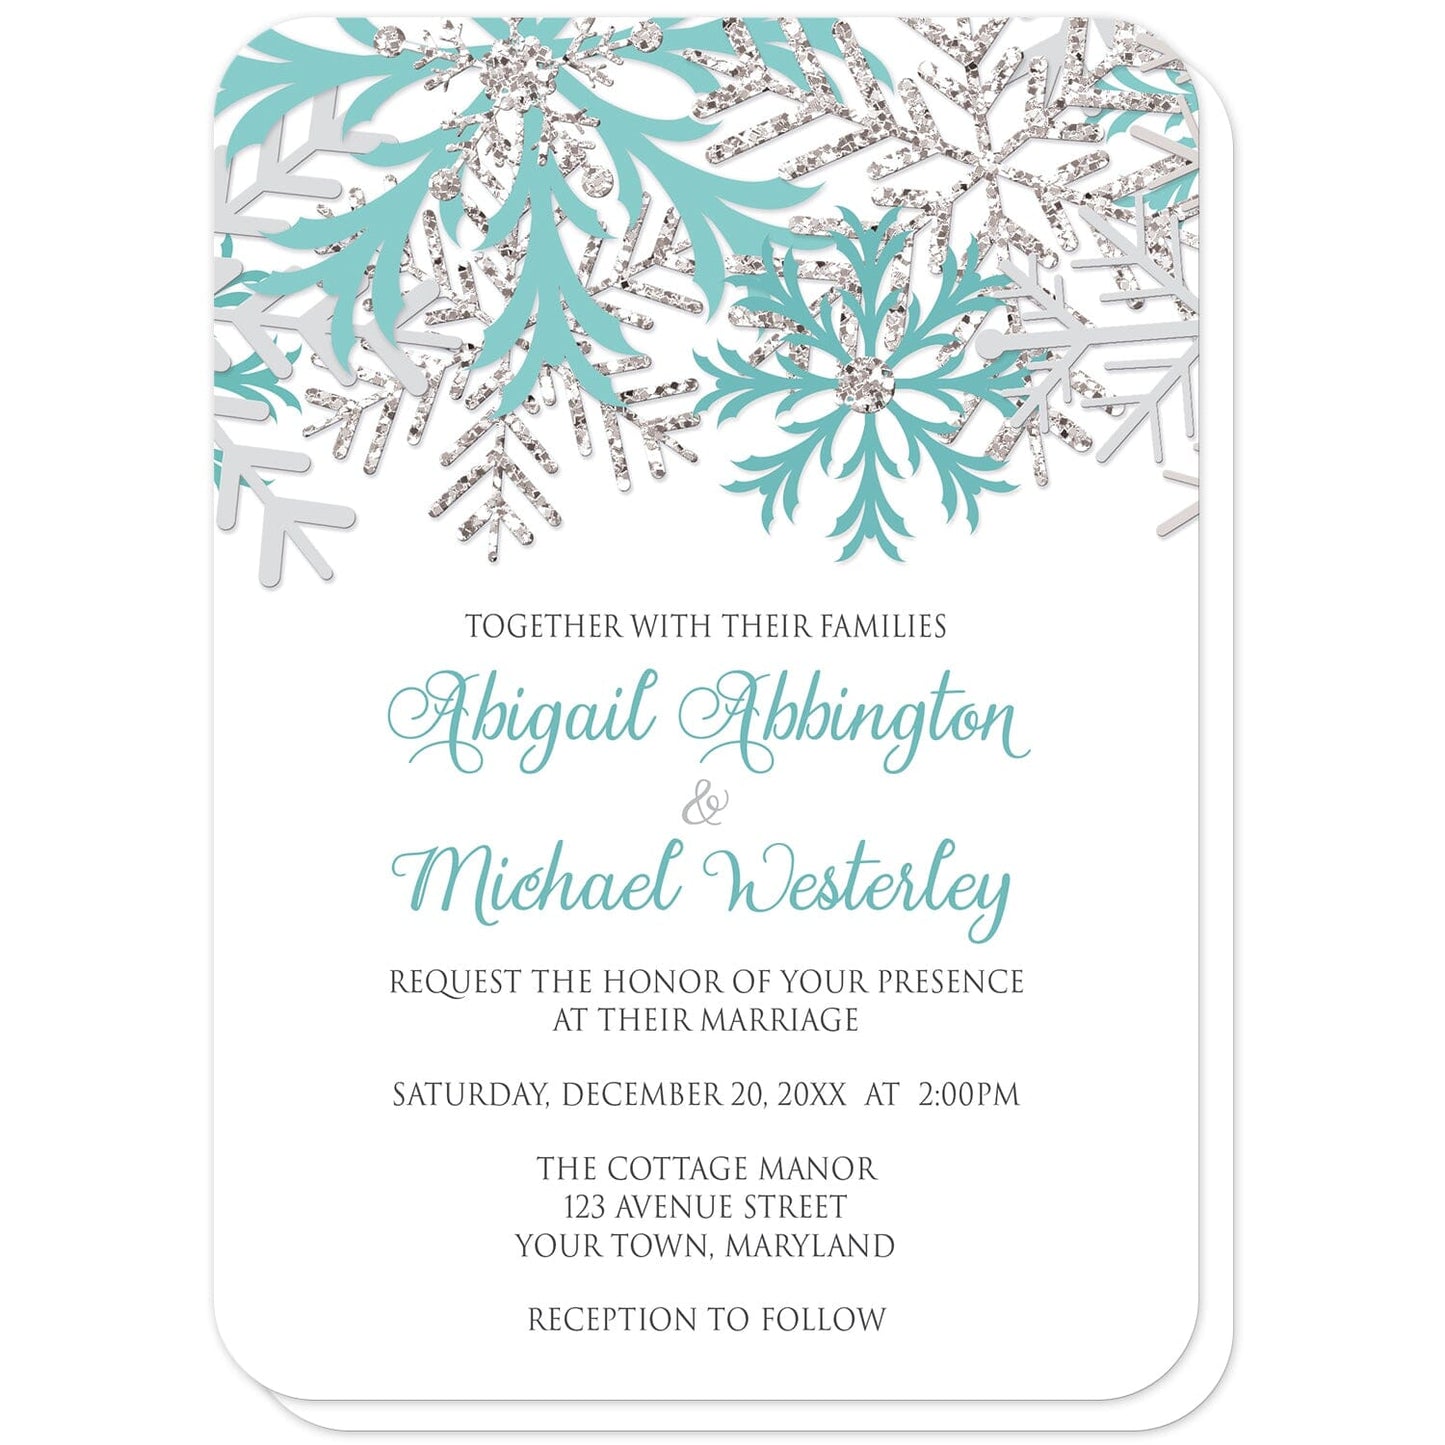 Winter Teal Silver Snowflake Wedding Invitations (with rounded corners) at Artistically Invited. Beautiful winter teal silver snowflake wedding invitations designed with teal, light teal, silver-colored glitter-illustrated, and light gray snowflakes along the top over a white background. Your personalized marriage celebration details are custom printed in teal and gray below the pretty snowflakes.